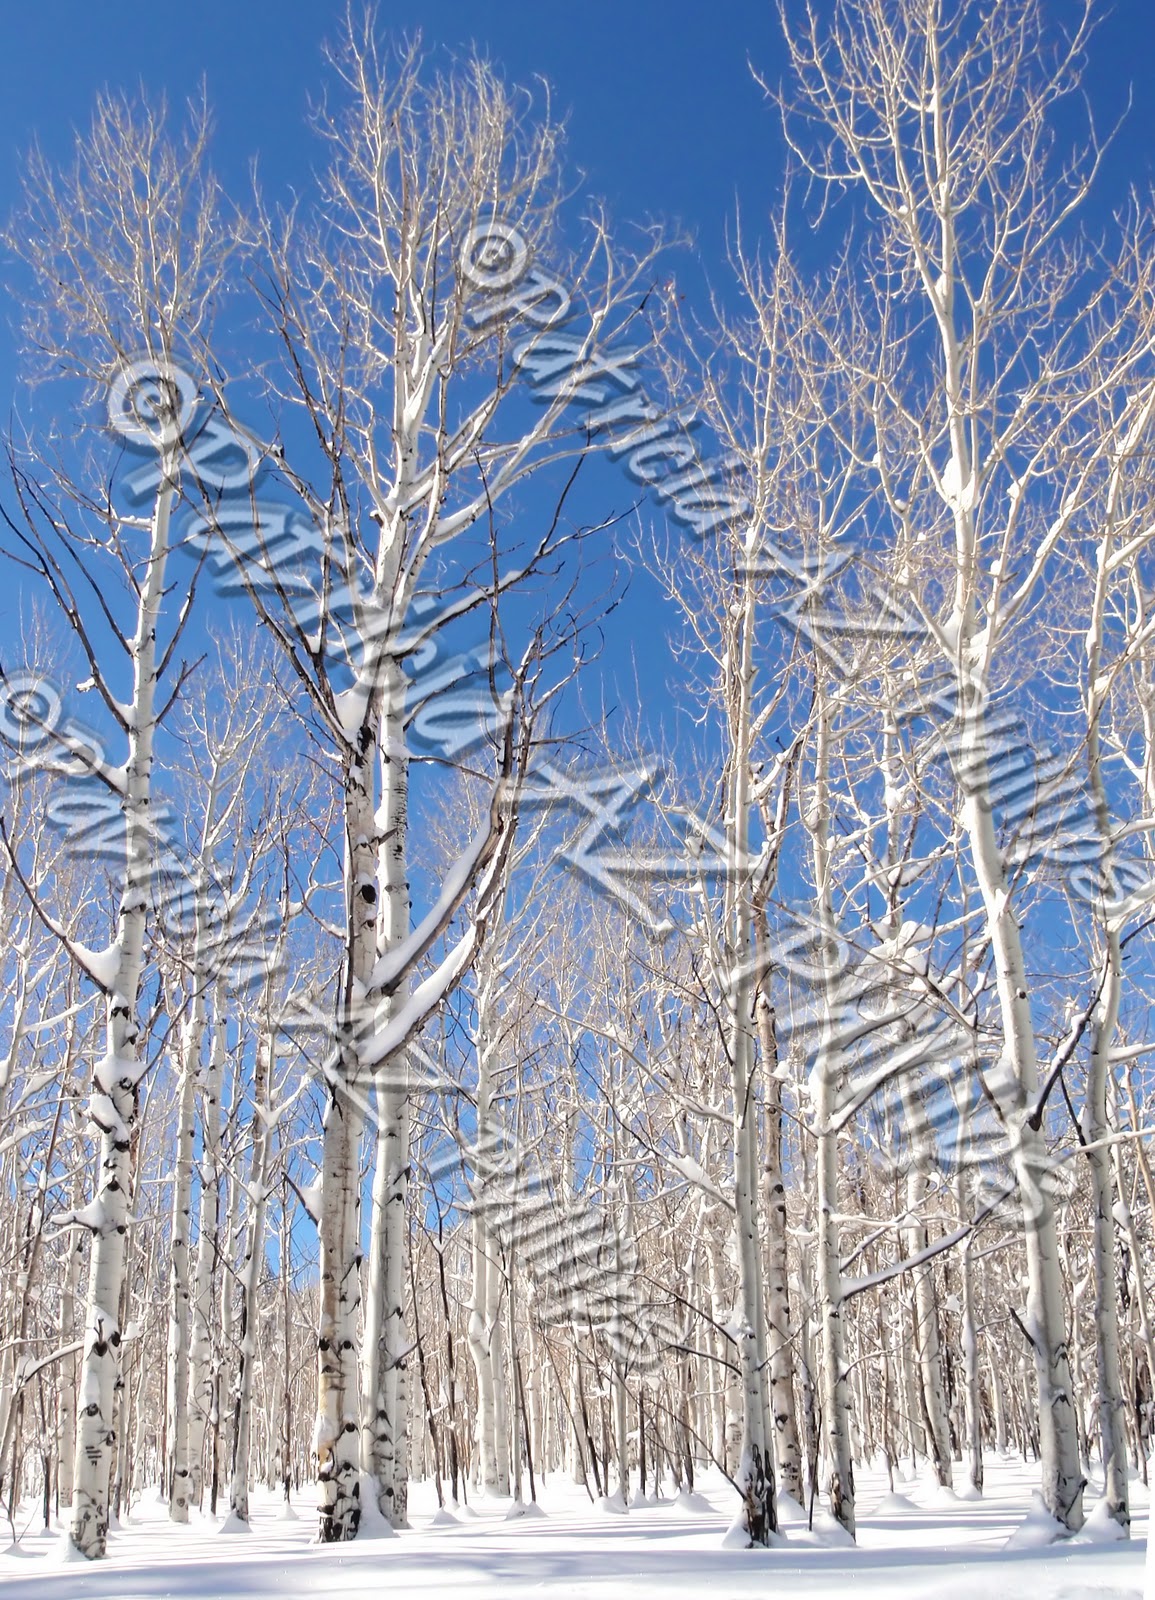 The Looney Bin Images Quaking Aspens In Snow